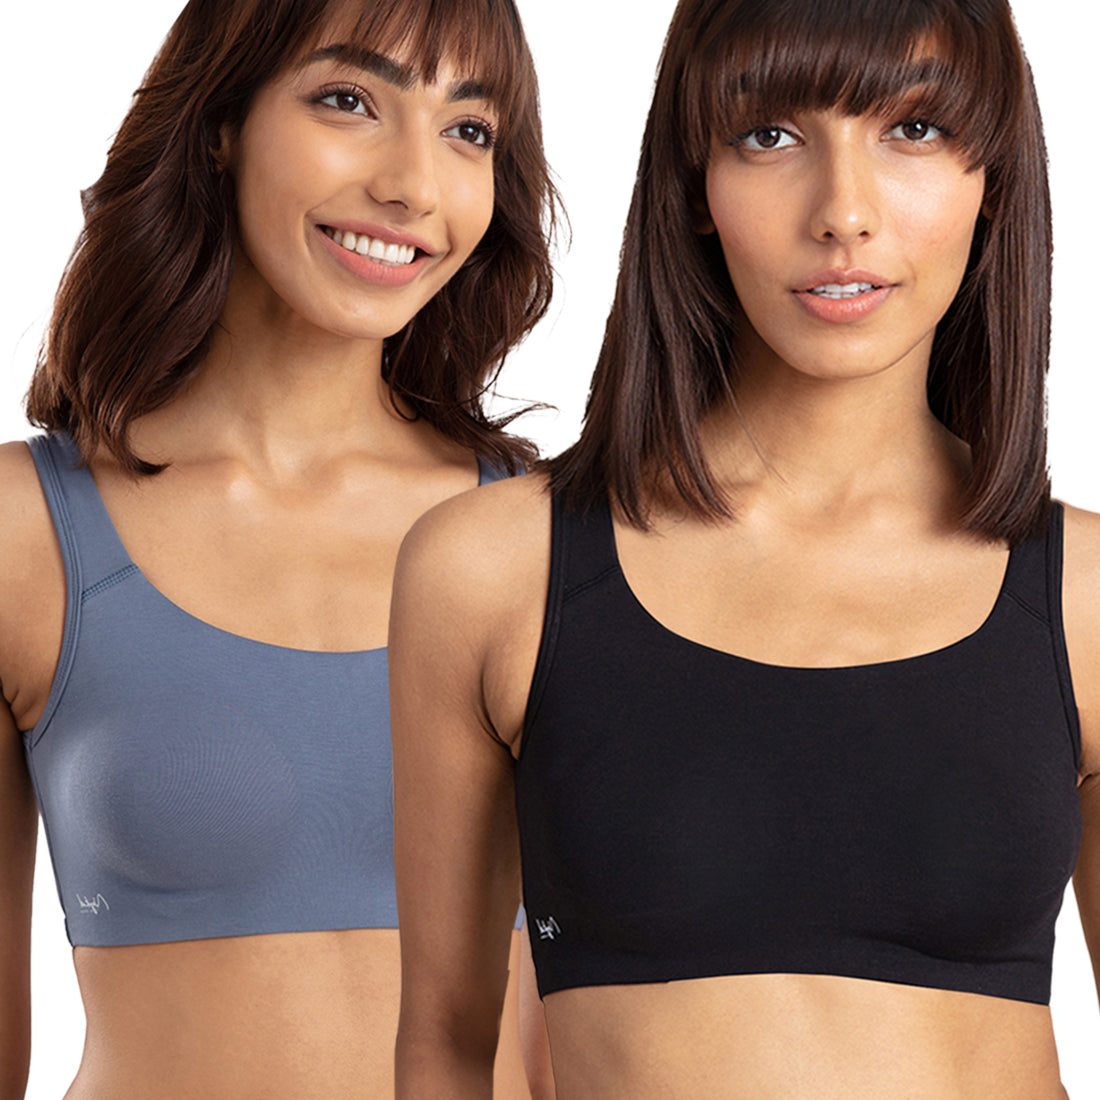 Pack of 2 Soft cup easy-peasy slip-on bra with Full coverage - NYB113 Blue & Black